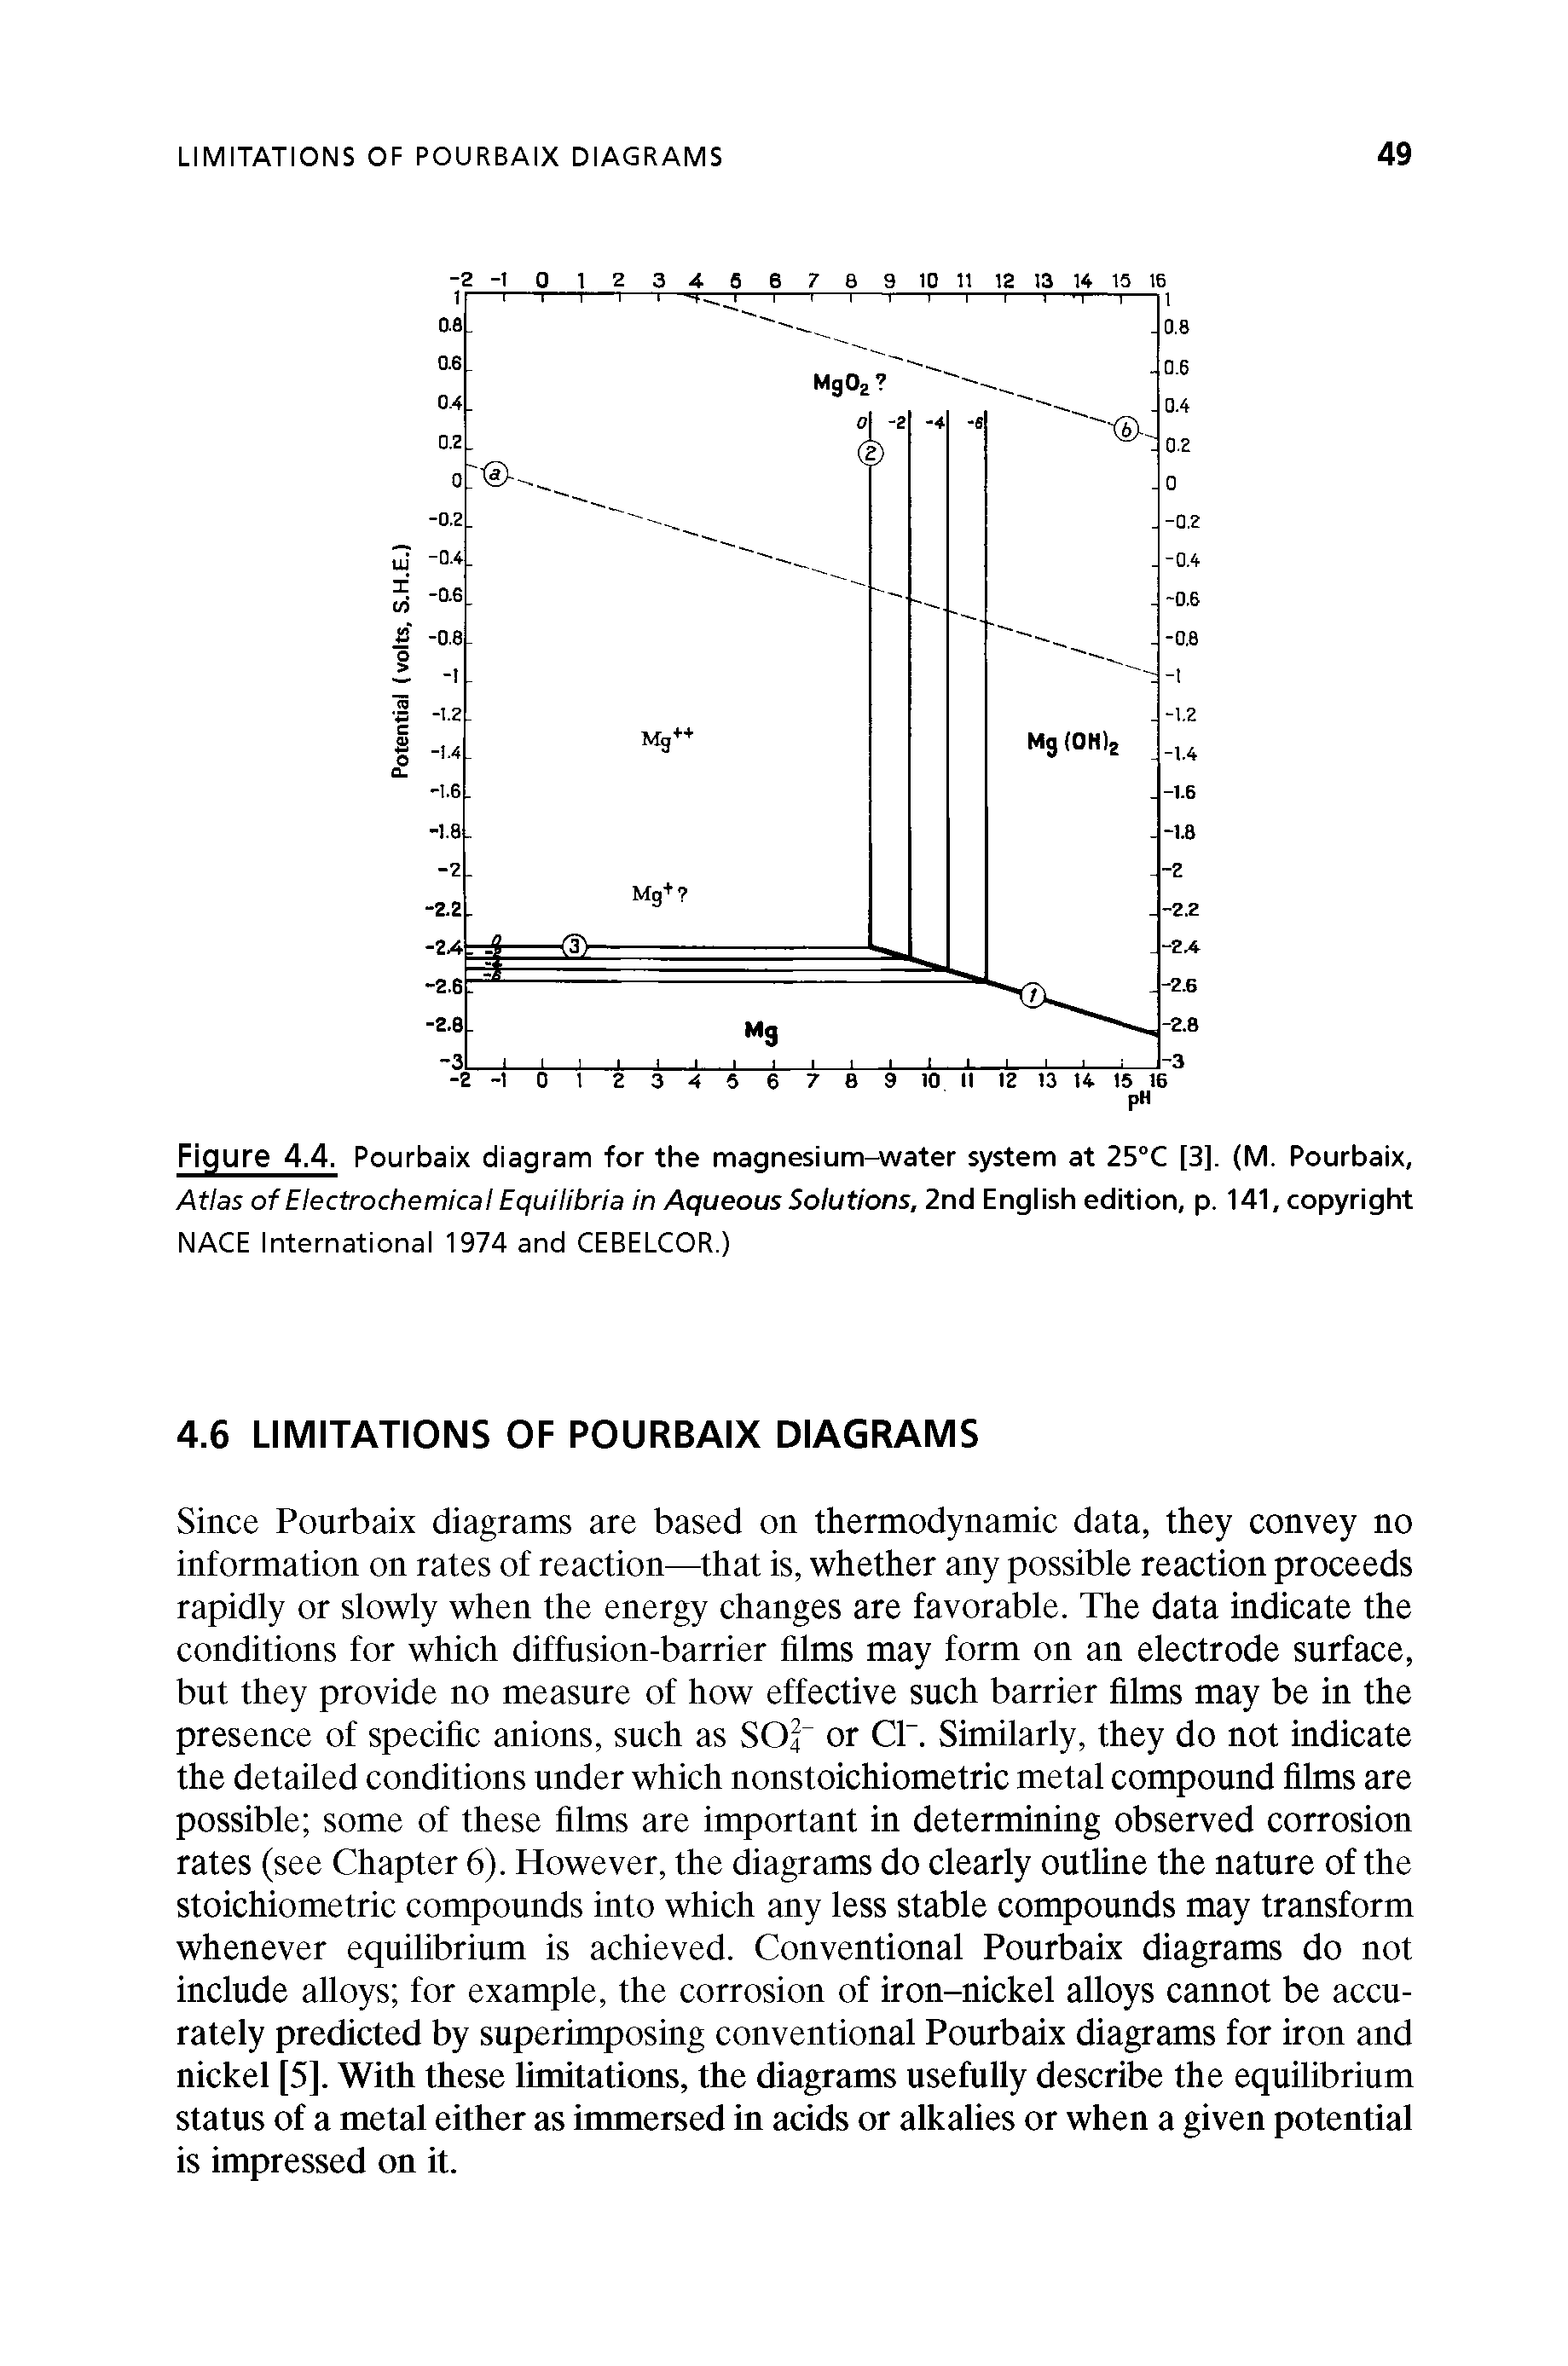 Figure 4.4. Pourbalx diagram for the magnesium-water system at 25°C [3]. (M. Pourbaix, Atlas of Electrochemical Equilibria in Aqueous Solutions, 2nd English edition, p. 141, copyright NACE International 1974 and CEBELCOR.)...